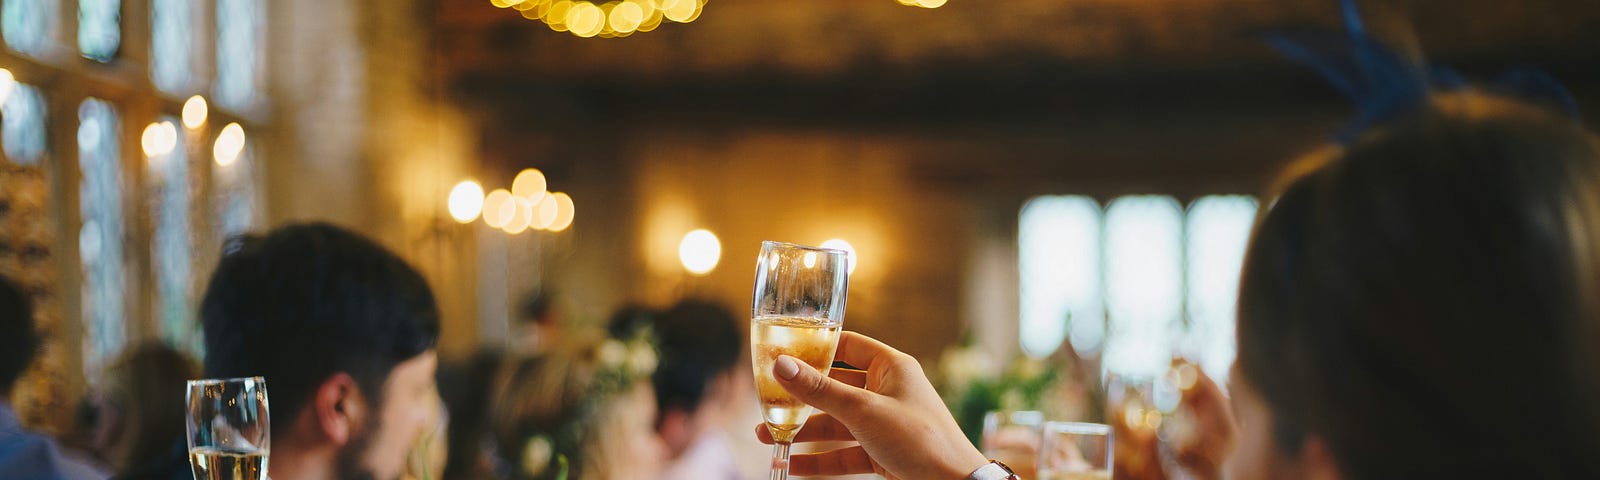 Image of people sitting at a formal table raising champagne glasses in a toast